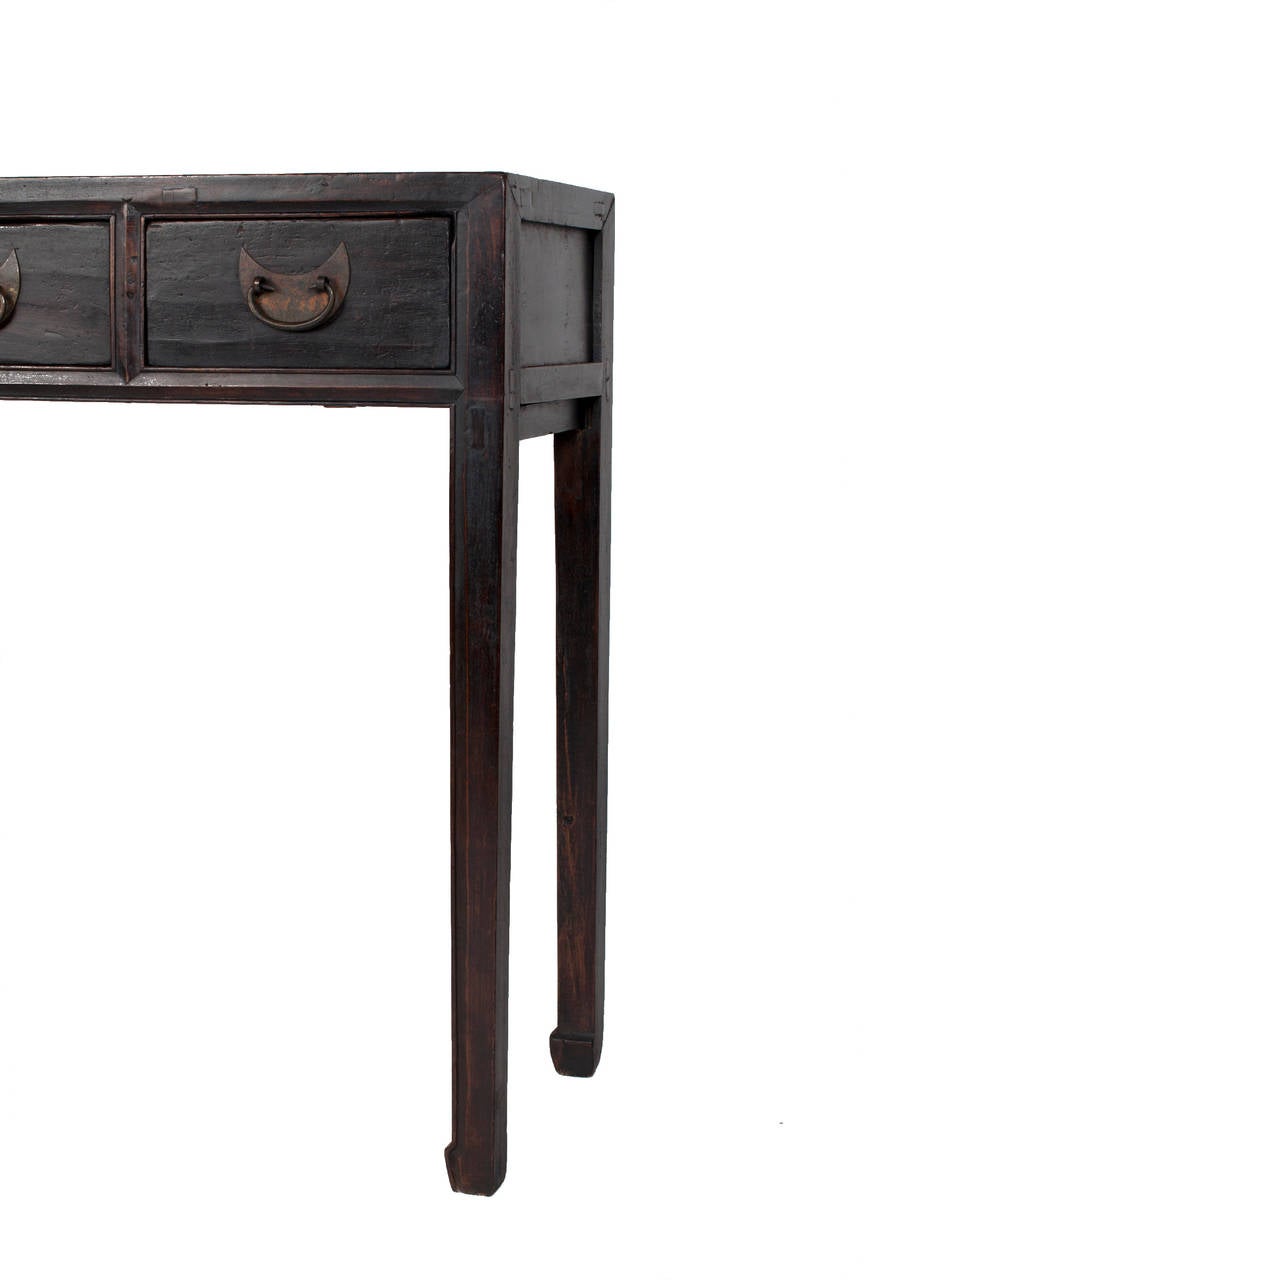 Three-drawer Chinese elm table with original brass quarter moon fittings as drawer pulls.